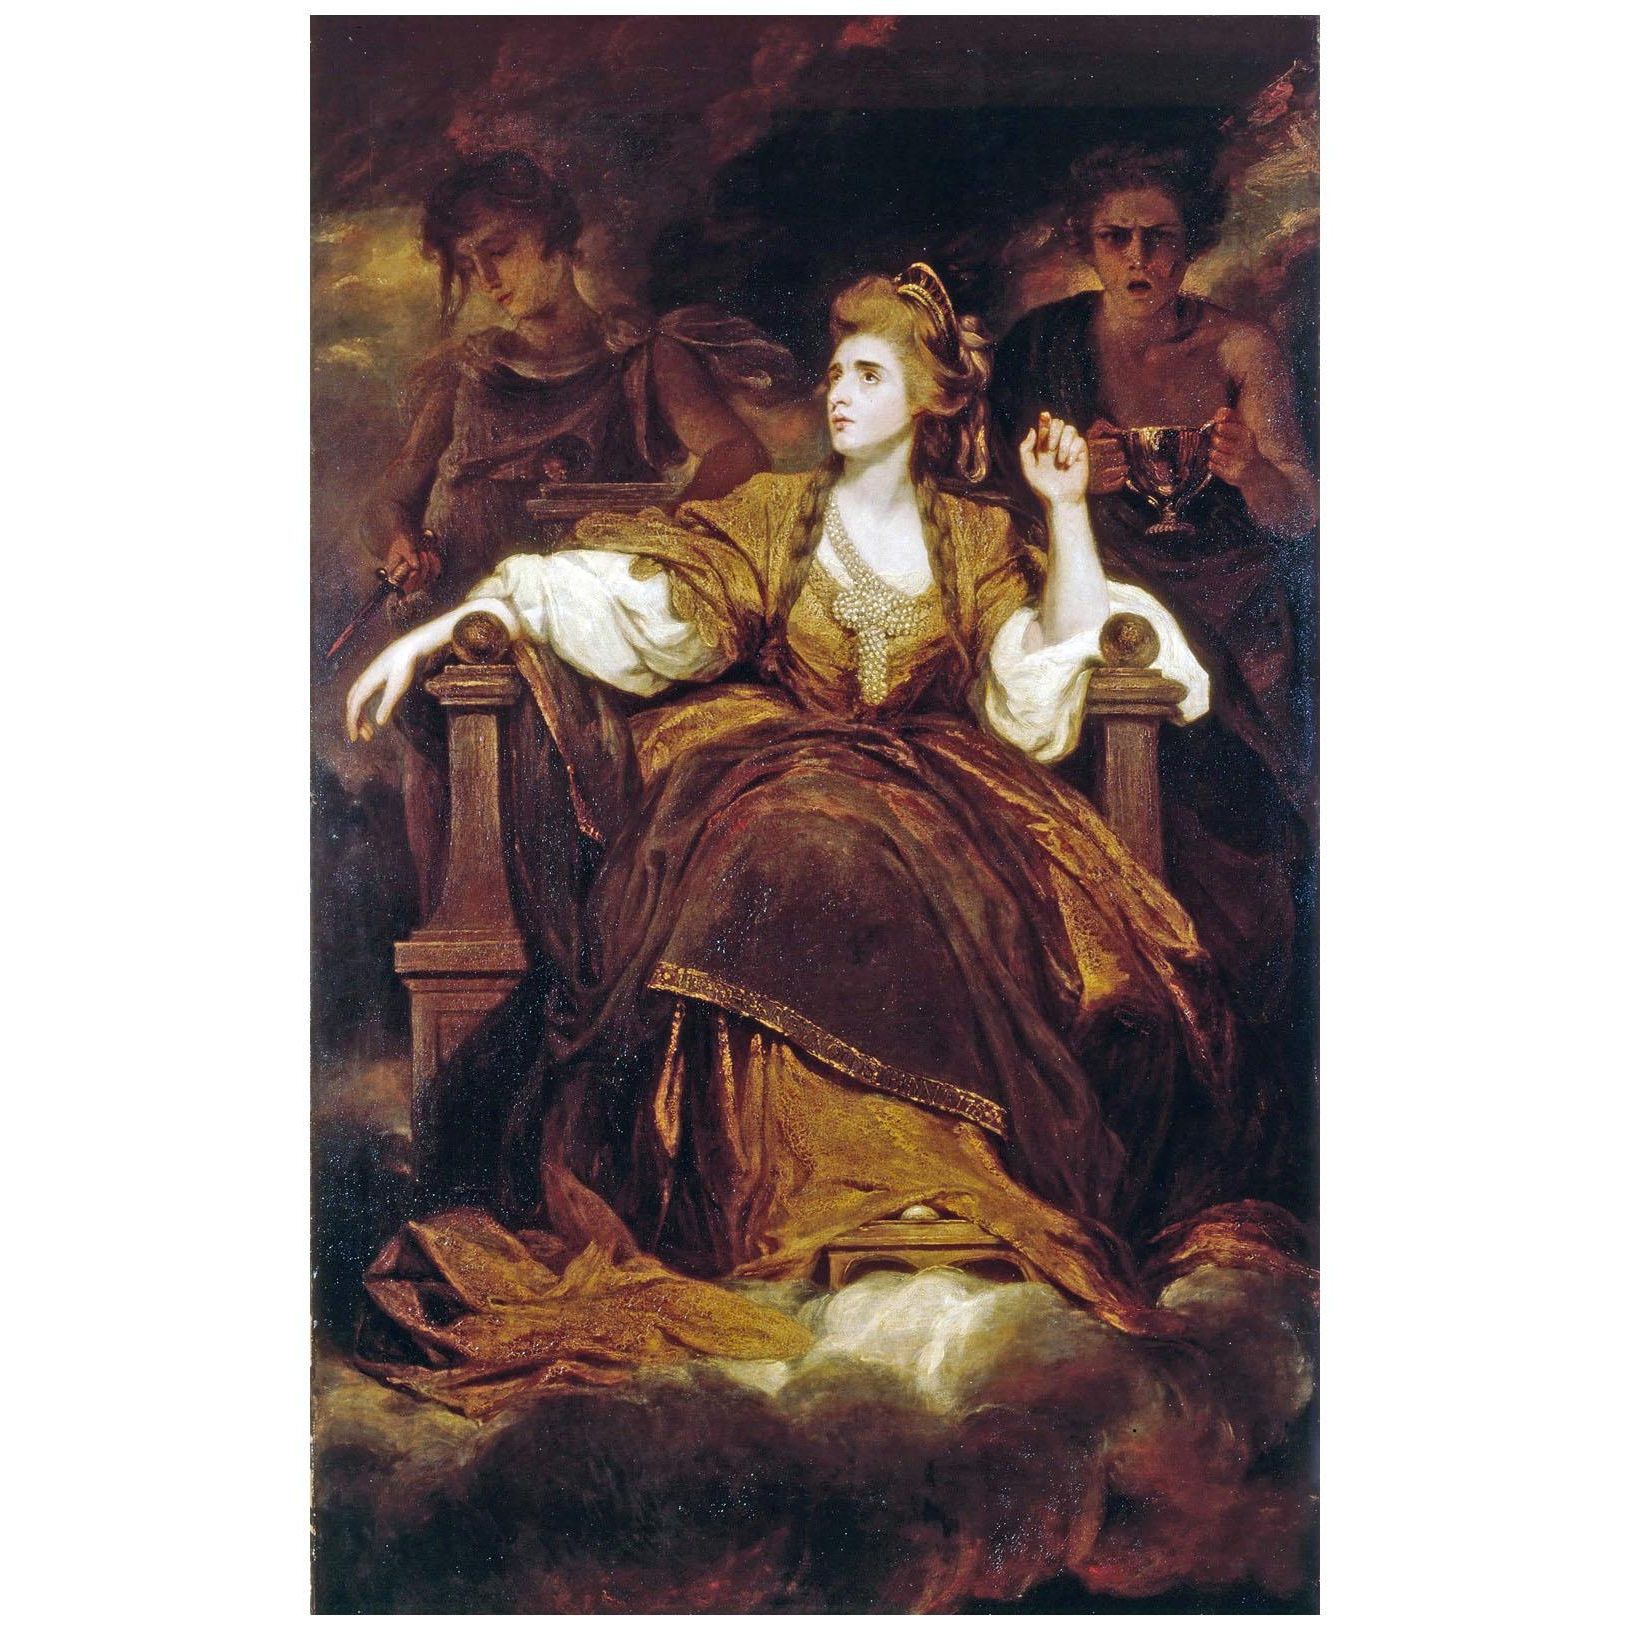 Joshua Reynolds. Mrs Siddons as the Tragic Muse. 1789. Dulwich Picture Gallery London